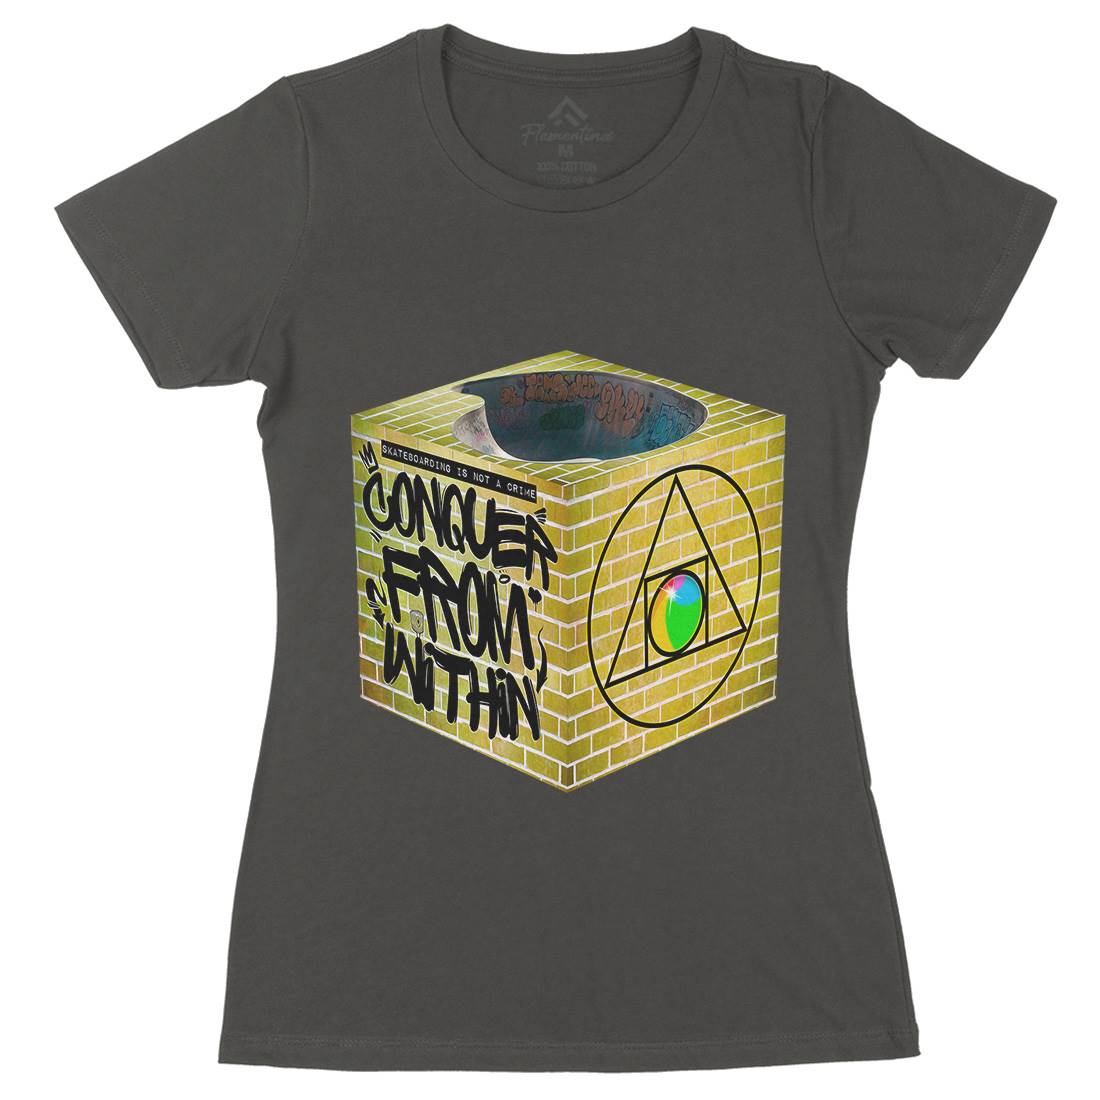 From Within Womens Organic Crew Neck T-Shirt Skate A838